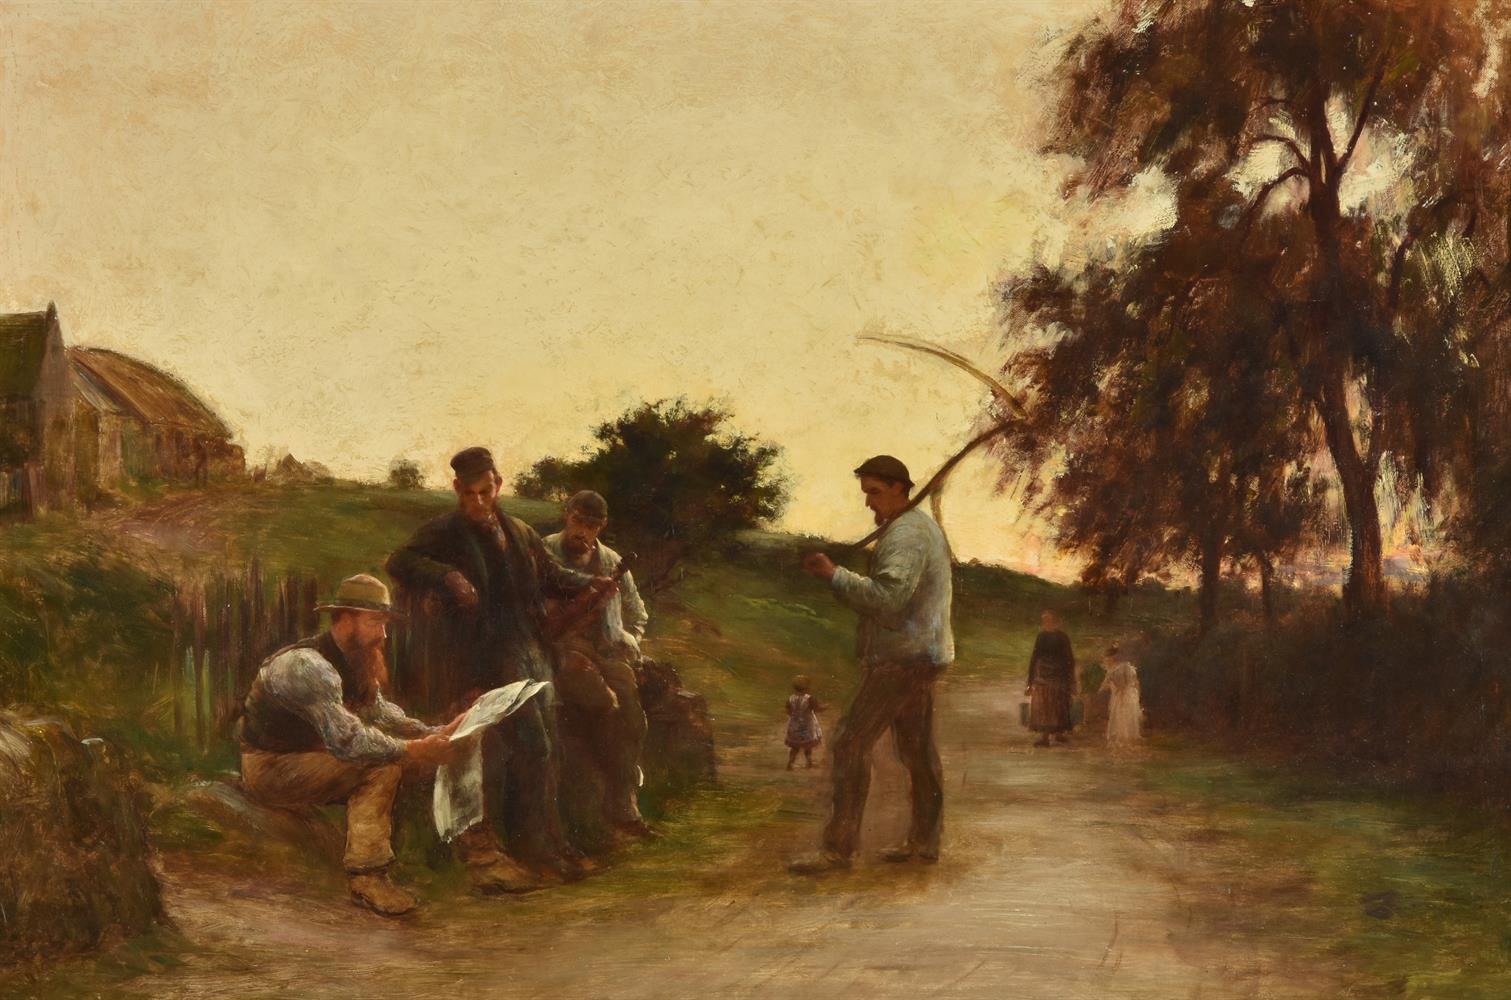 Attributed to William Darling Mckay (British 1844-1924), Harvesters at rest in a landscape